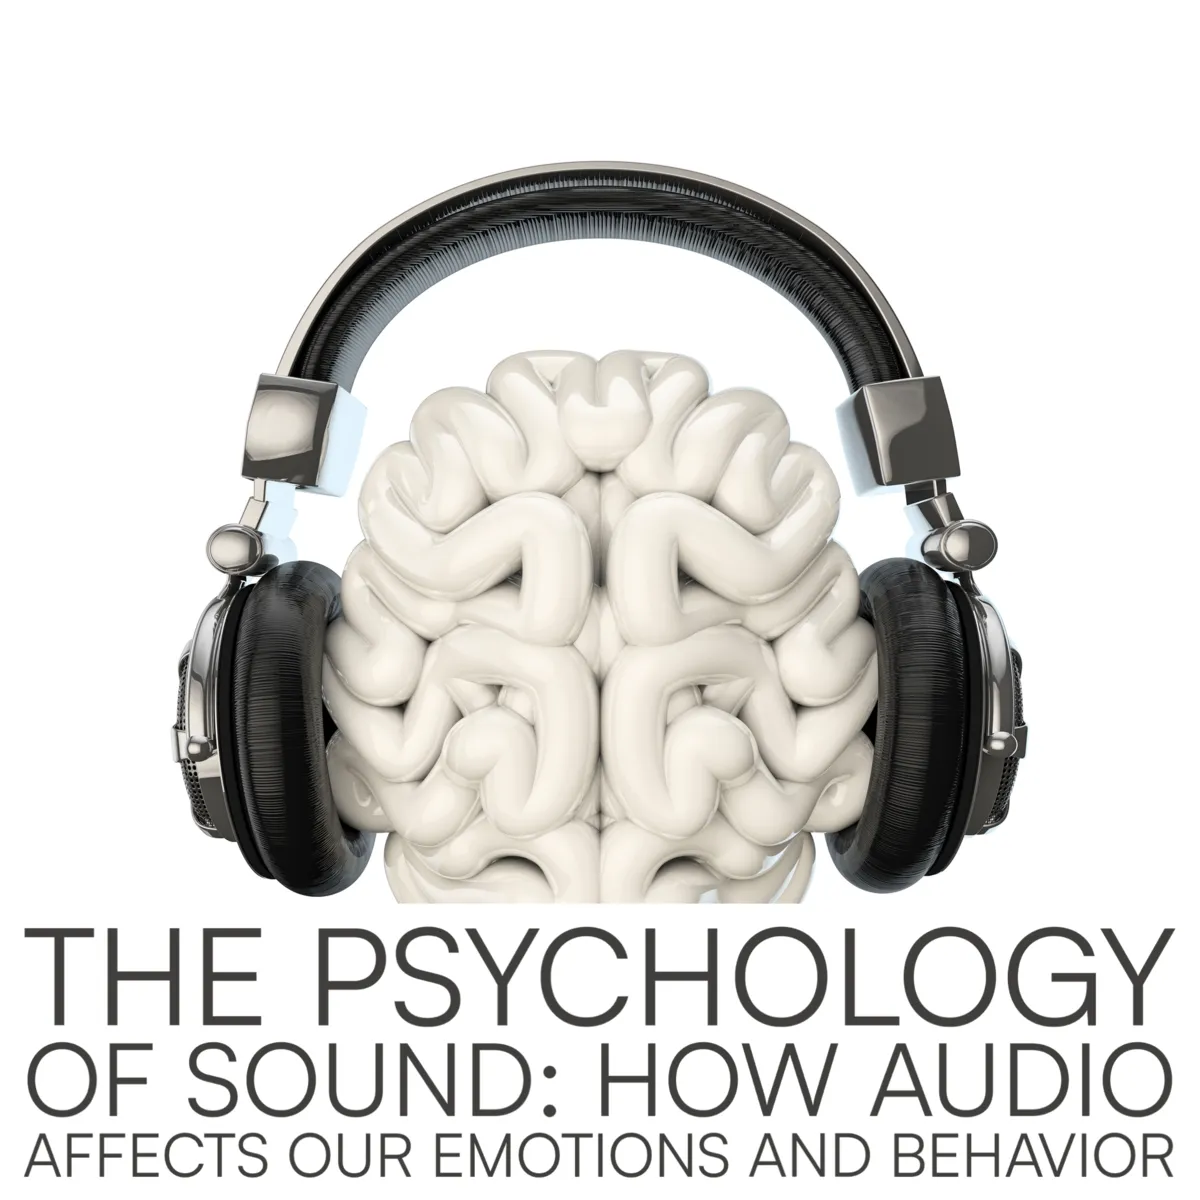 The Psychology of Sound: How Audio Affects Our Emotions and Behavior